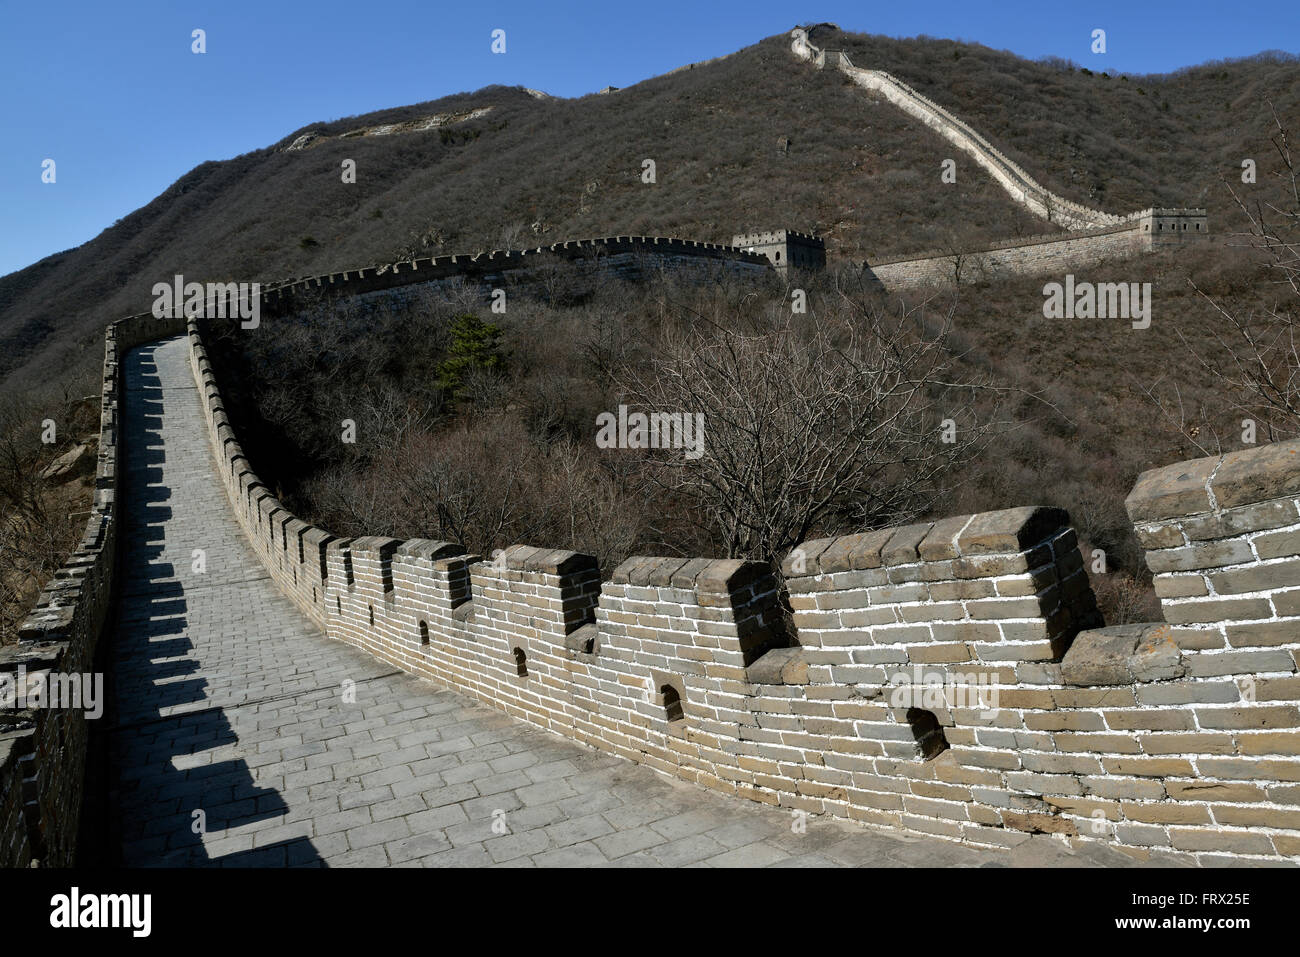 Mutianyu section of China's Great Wall in Beijing, China. Stock Photo